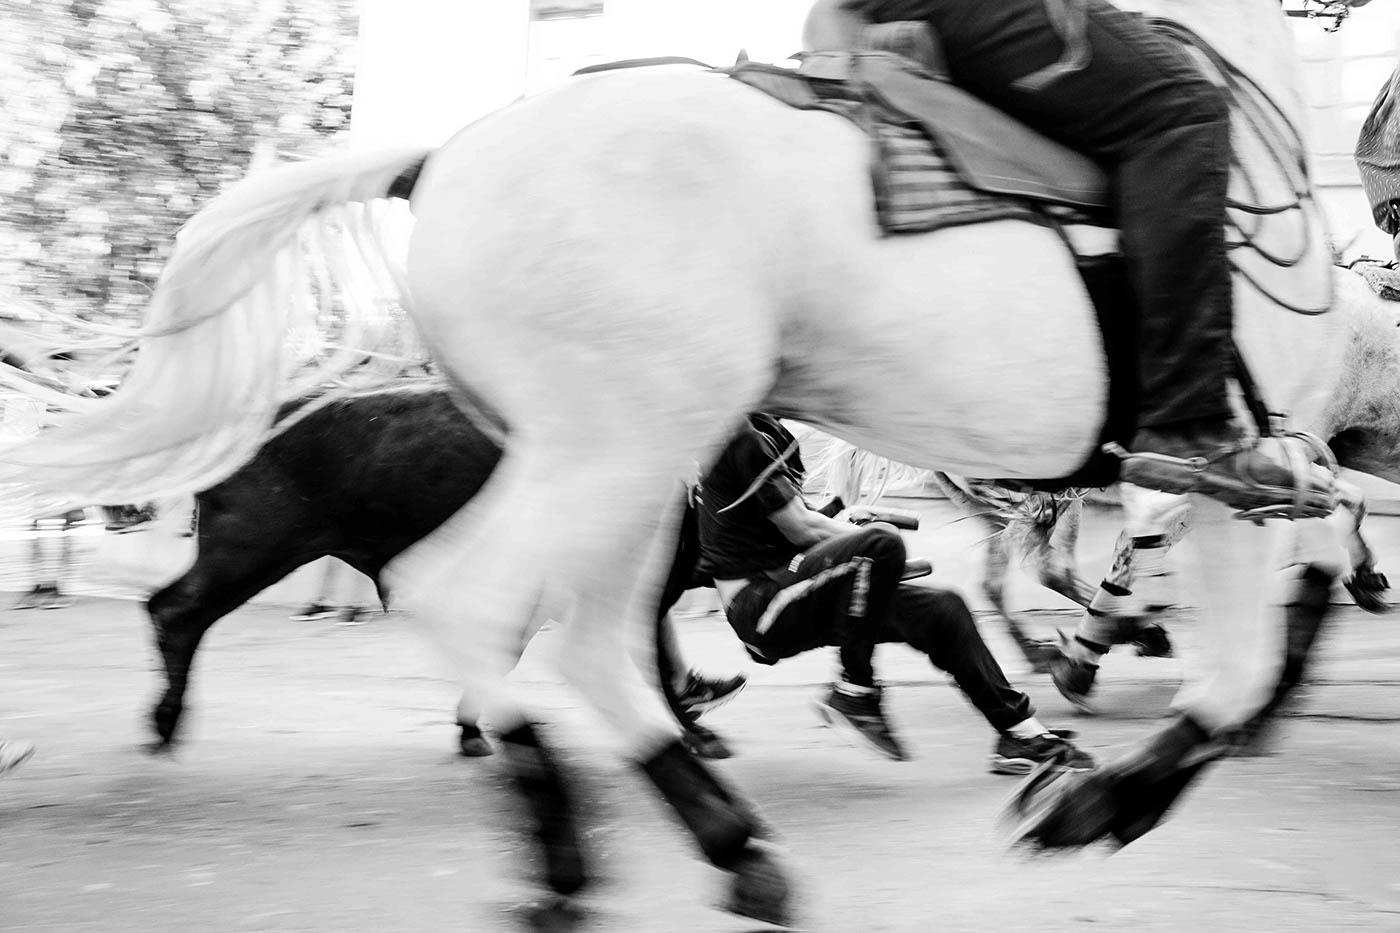 Camargue Documentary  france culture tradition people storytelling   farmlife Nature blackandwhite